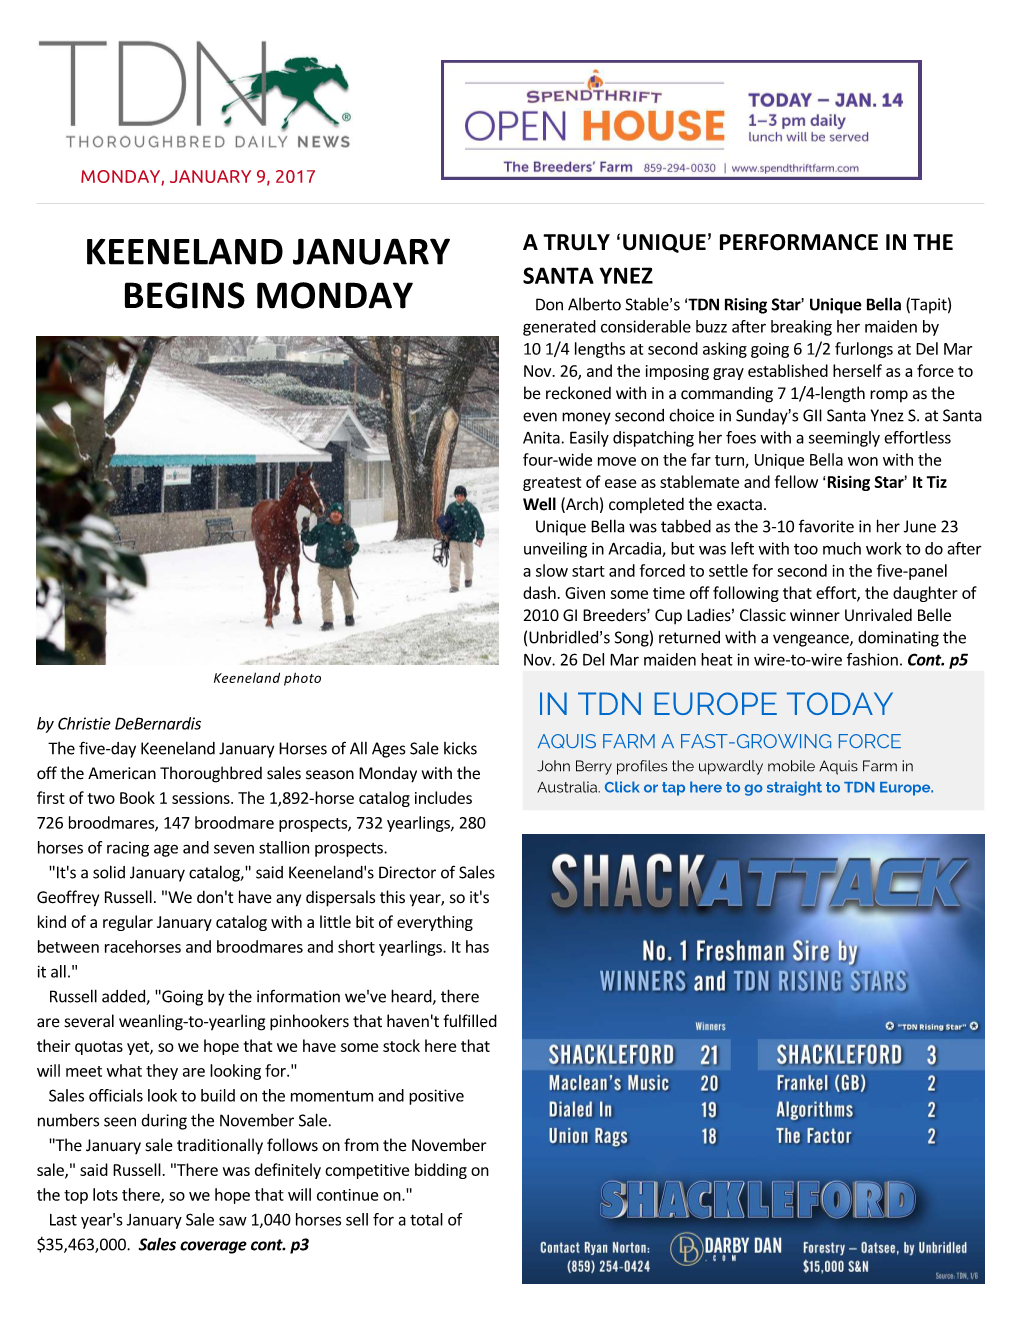 Keeneland January Begins Monday HIDDEN BROOK MORE THAN READY for (Cont